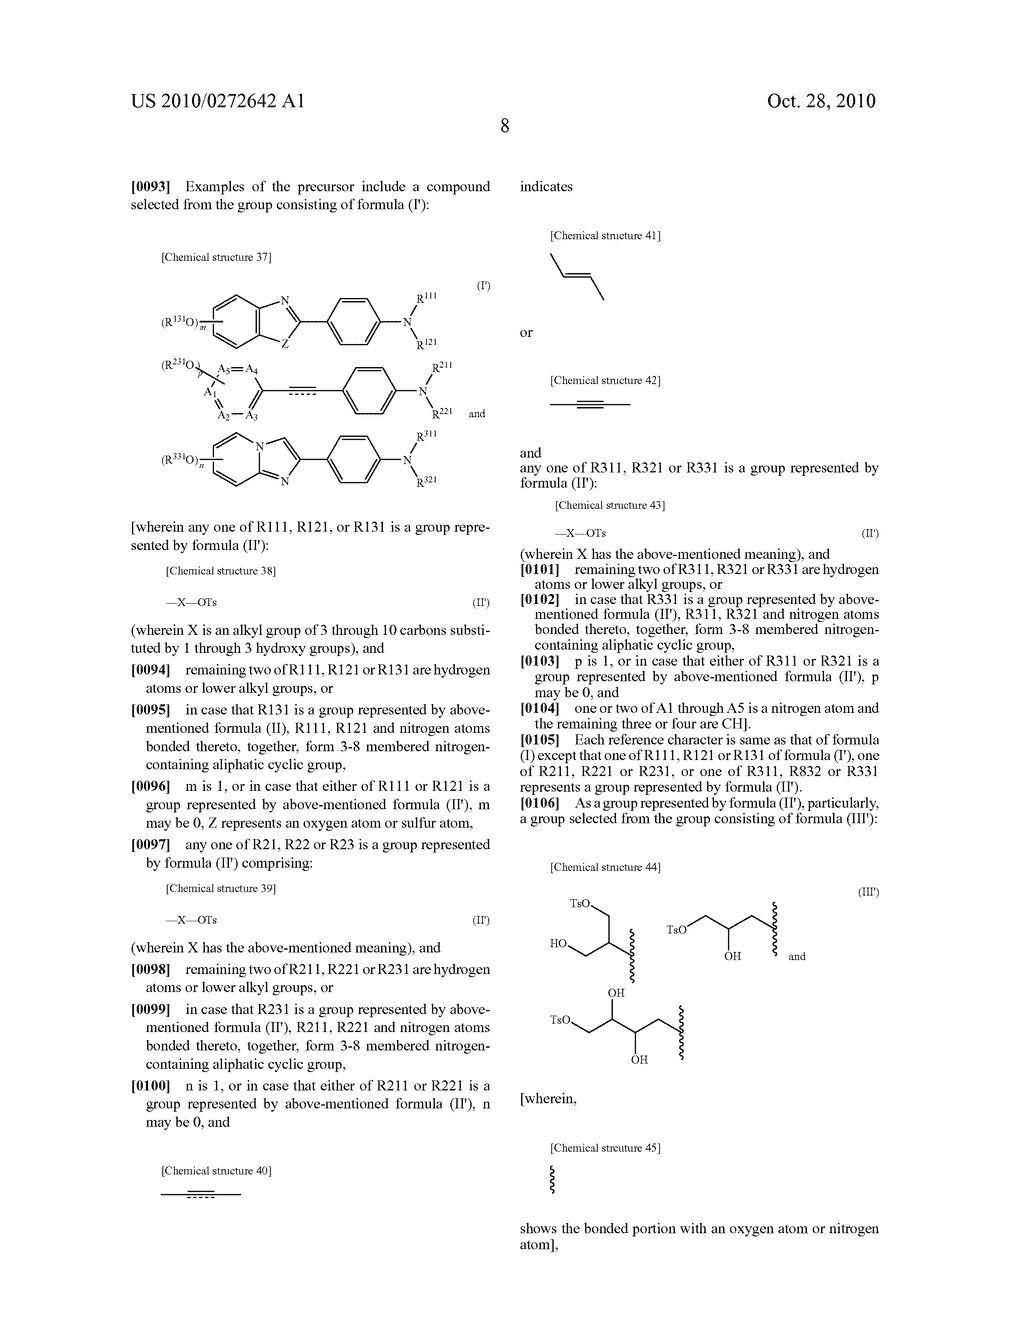 PET PROBE HAVING AN ALKOXY GROUP SUBSTITUTED BY FLUORINE AND HYDROXY GROUP - diagram, schematic, and image 10